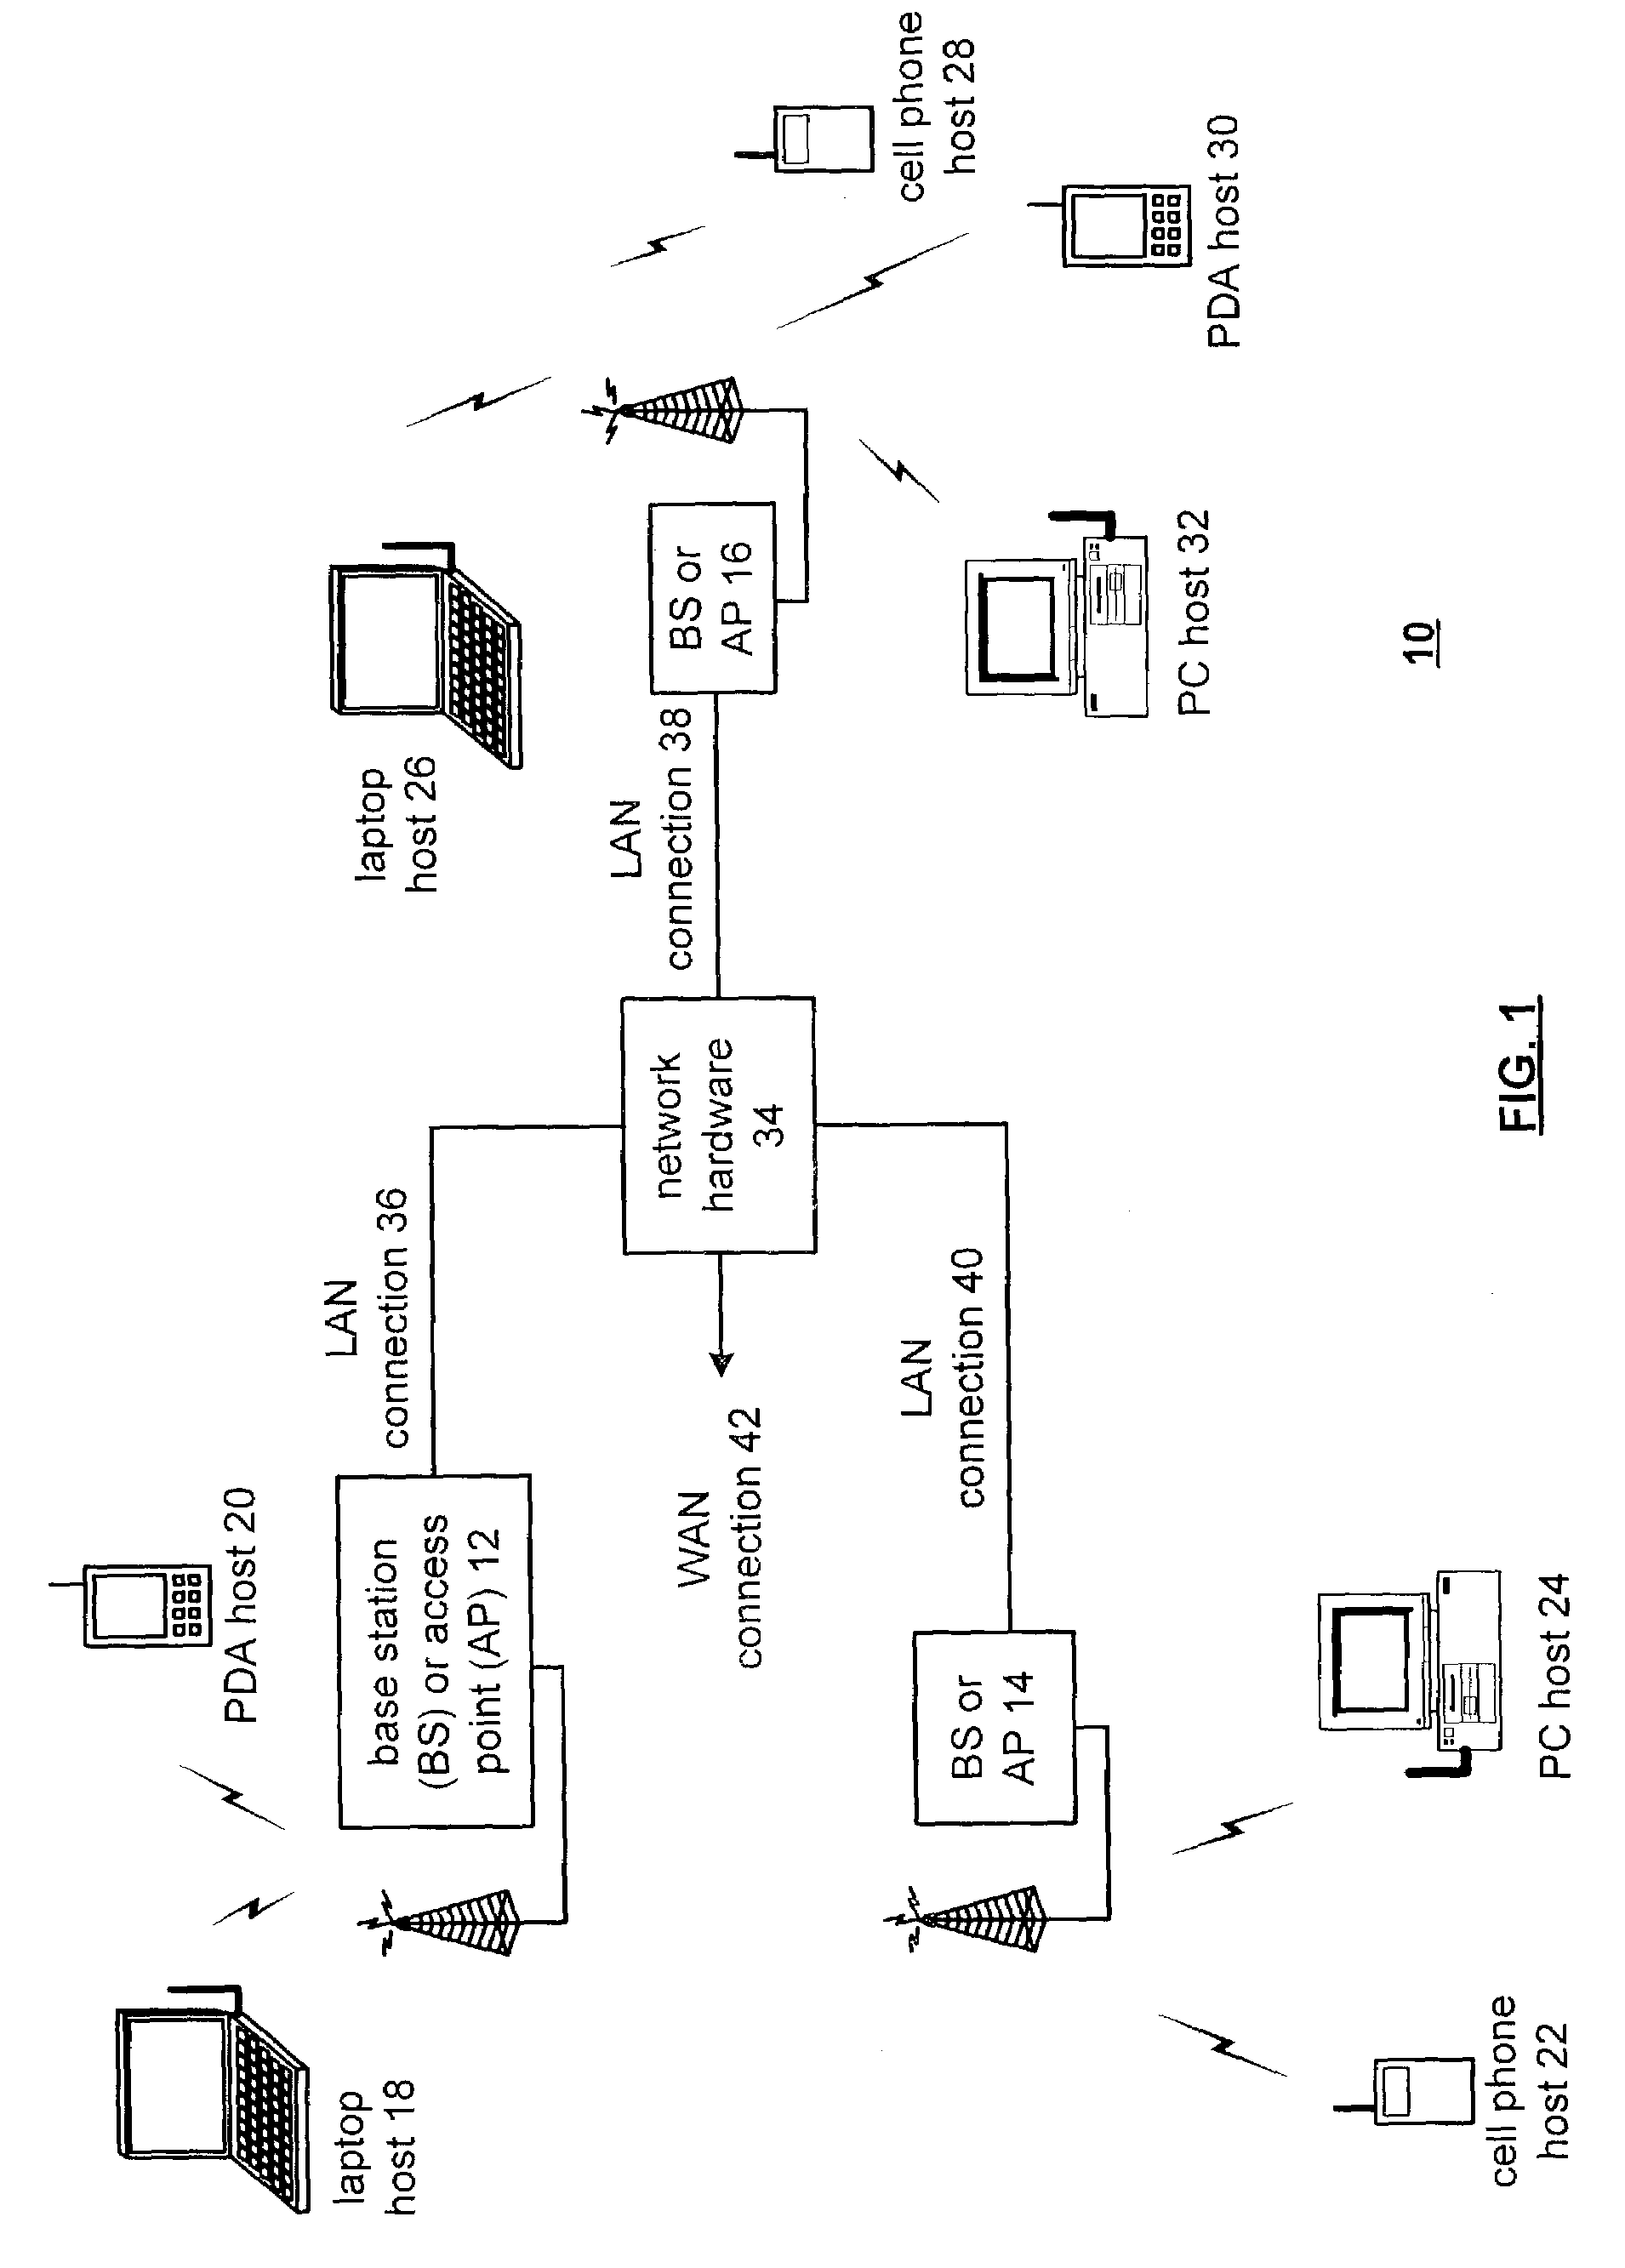 Low power band-gap current reference